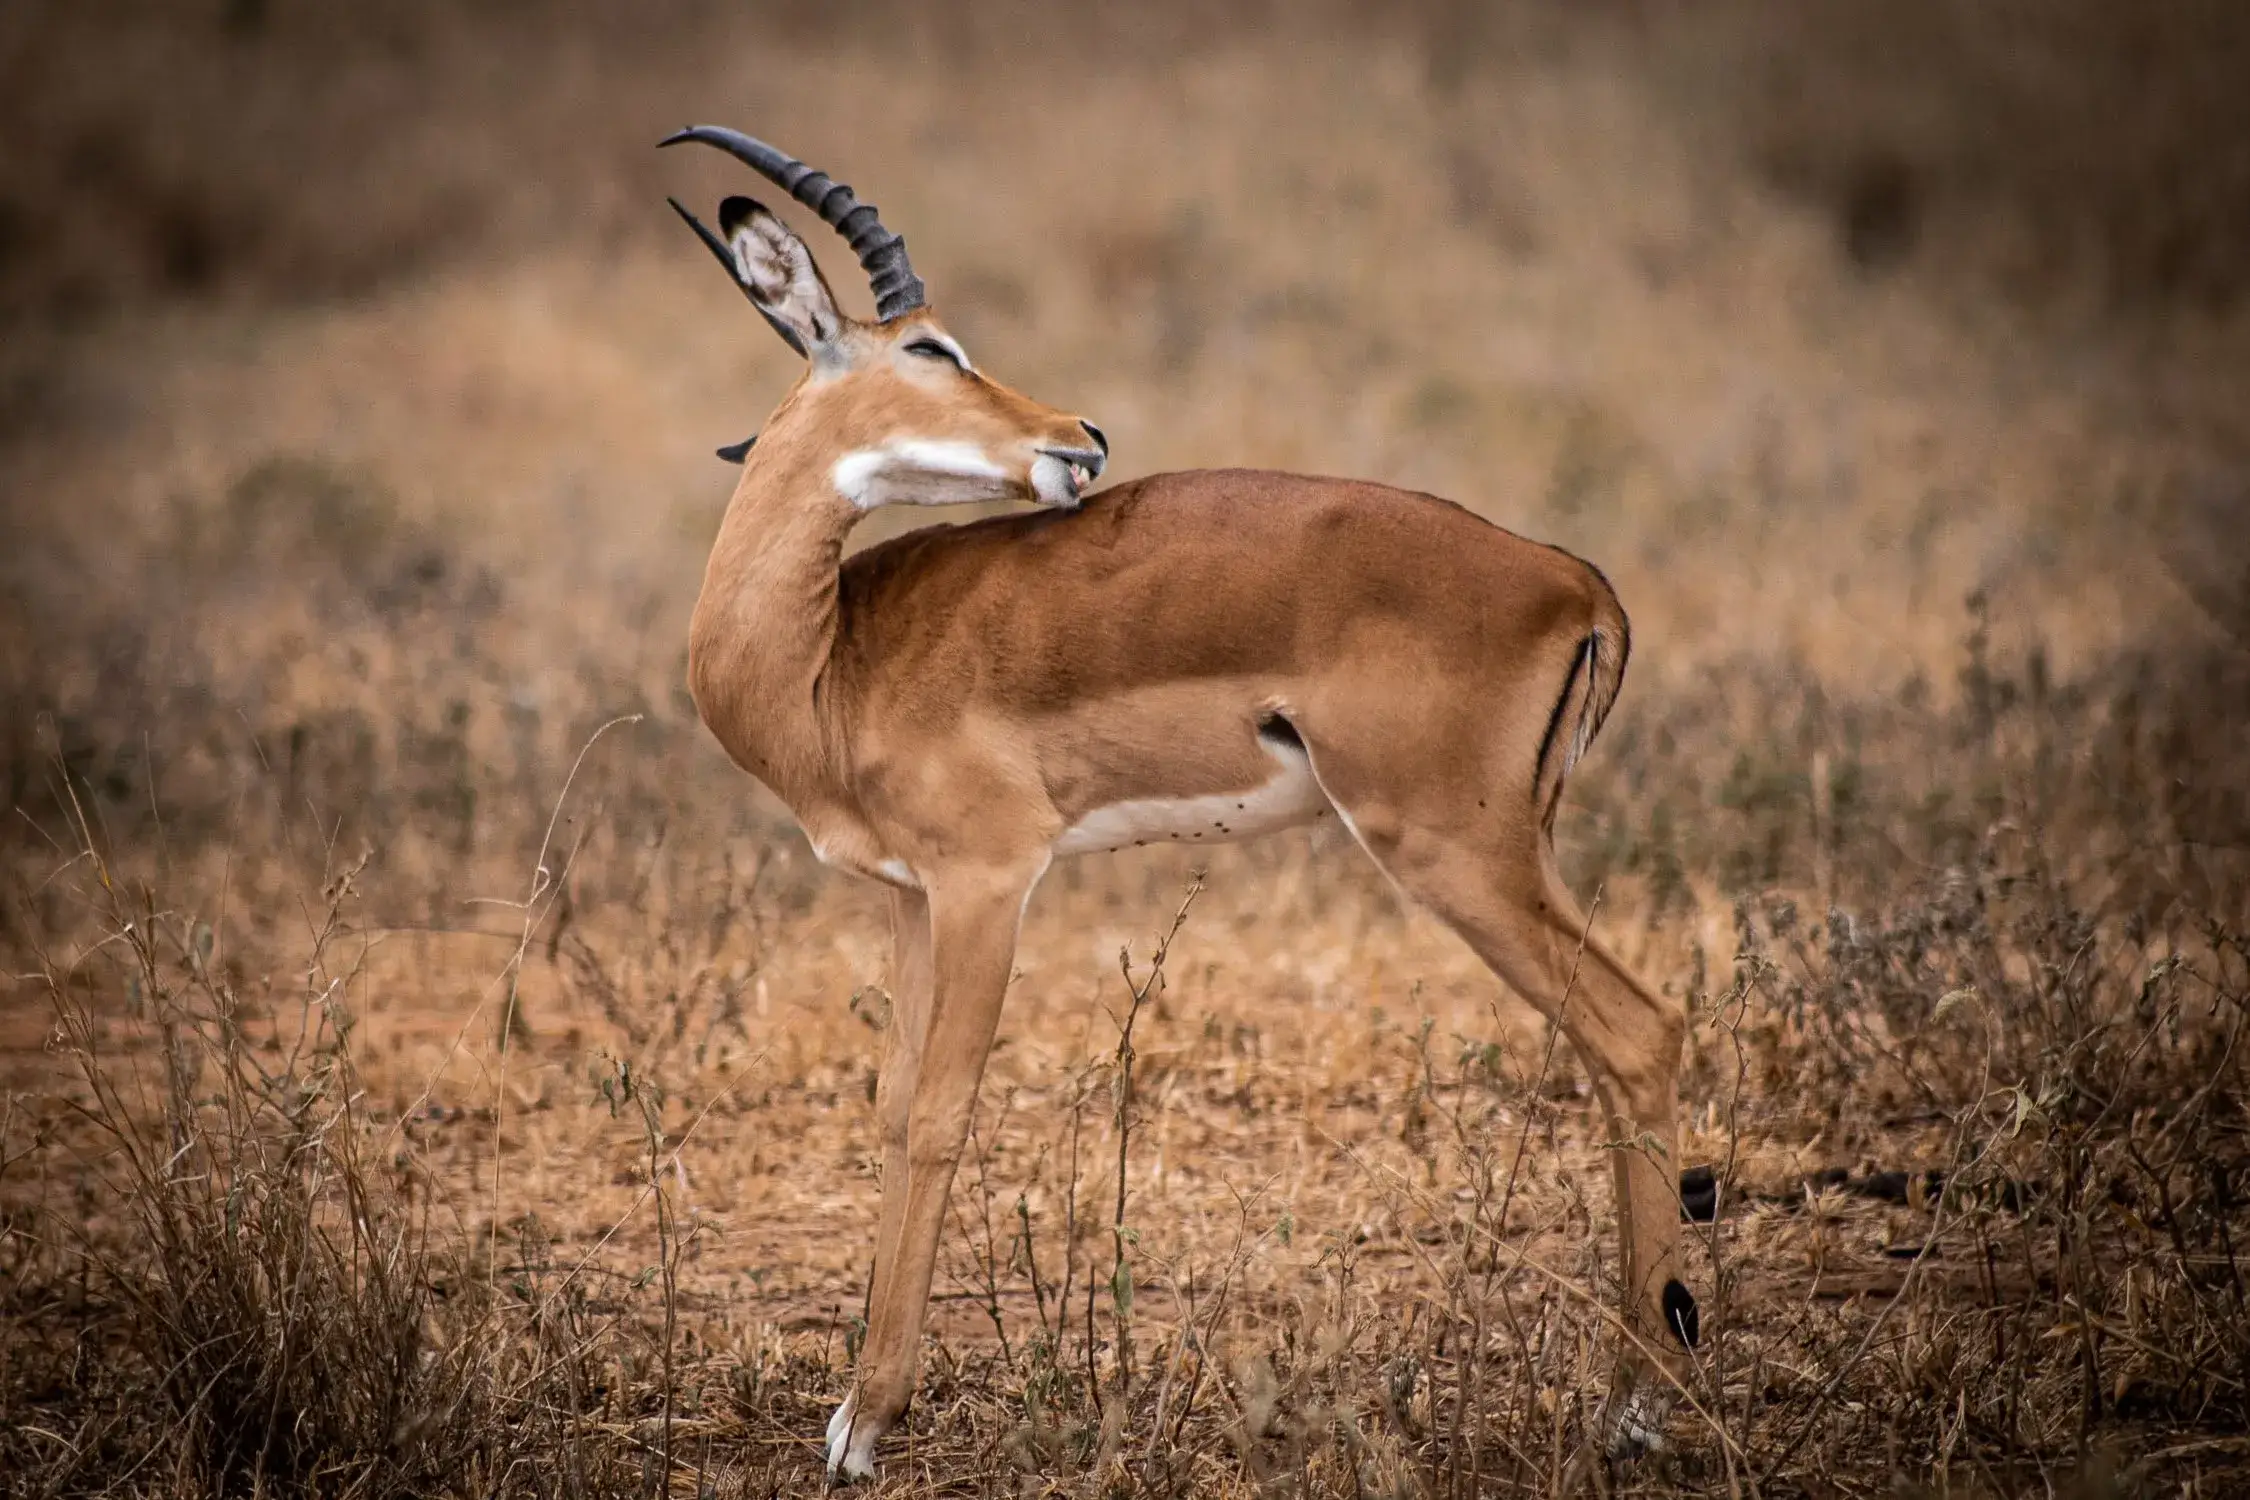 Impala spotted in Tanzanian national park